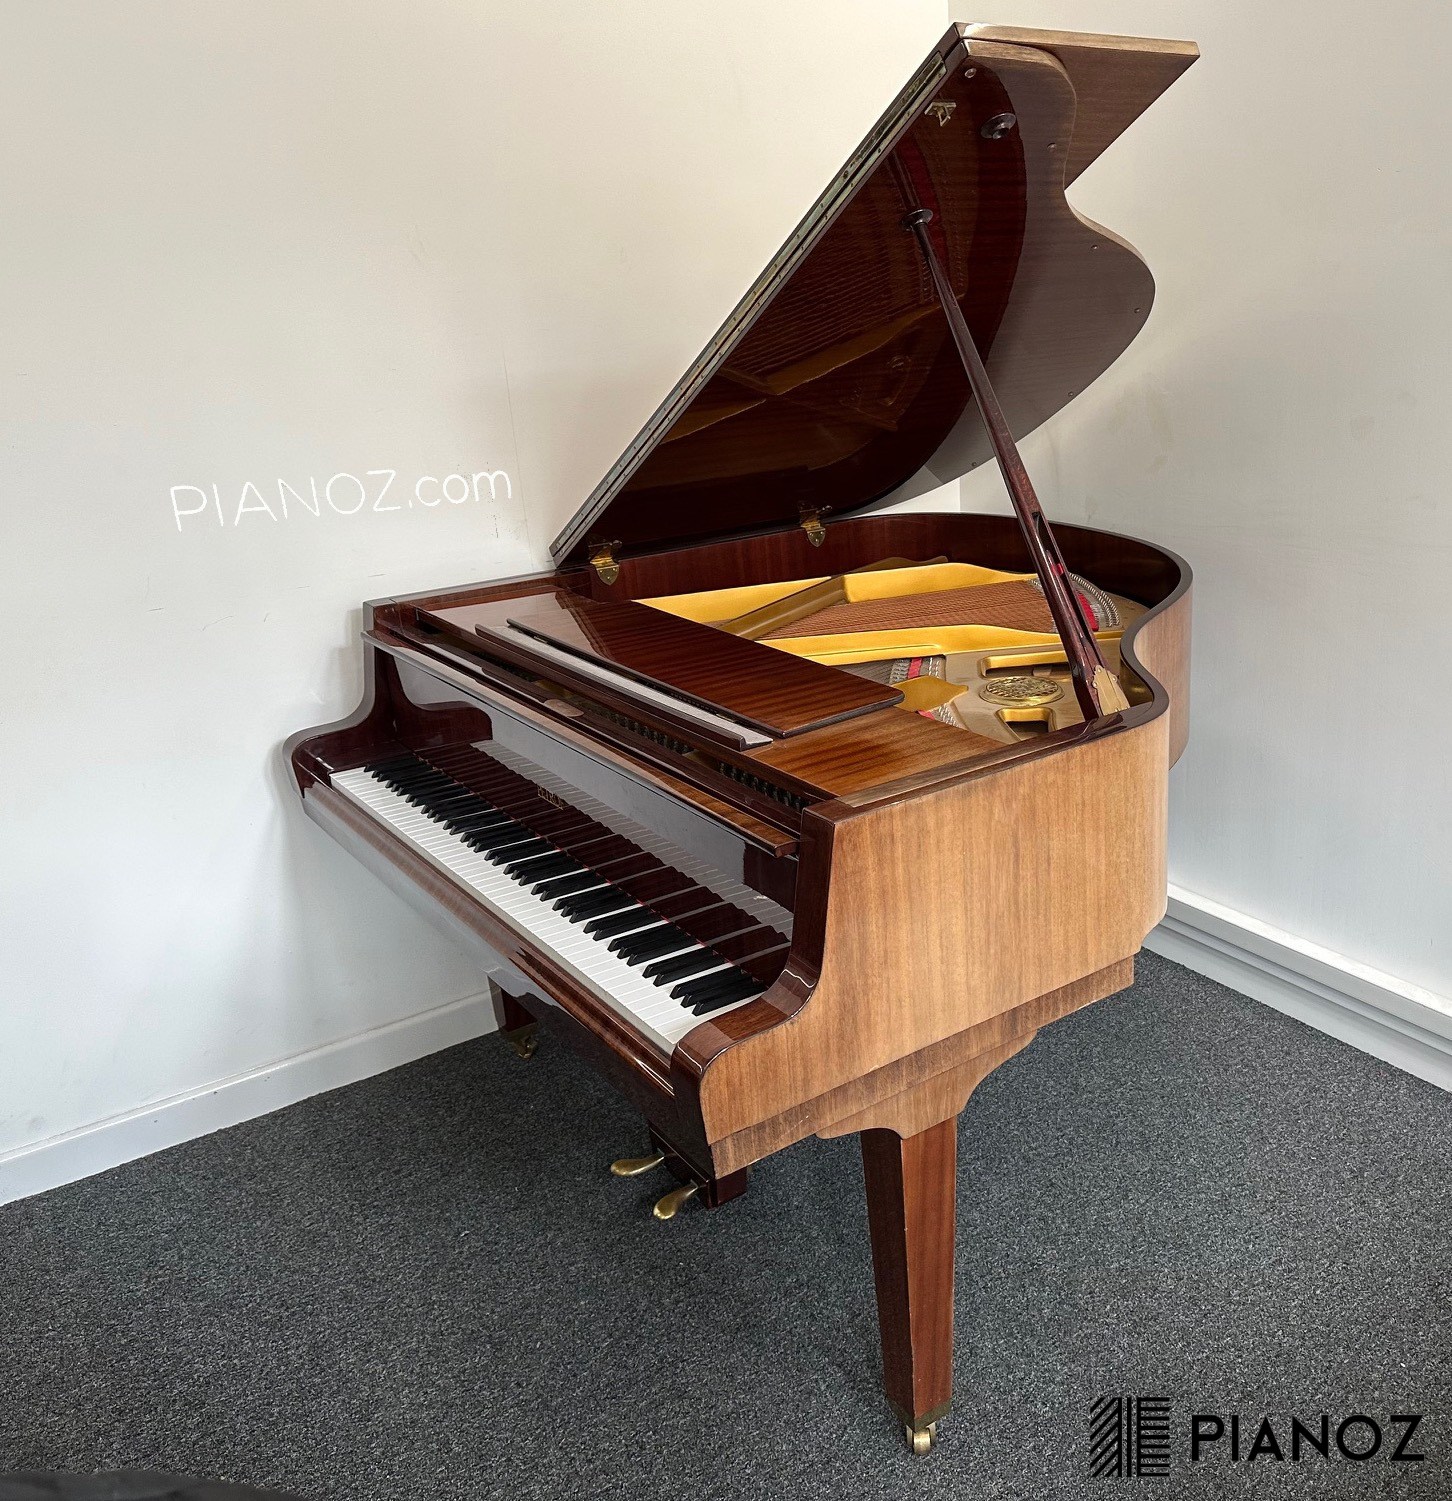 Petrof Model V 1990 Baby Grand Piano piano for sale in UK